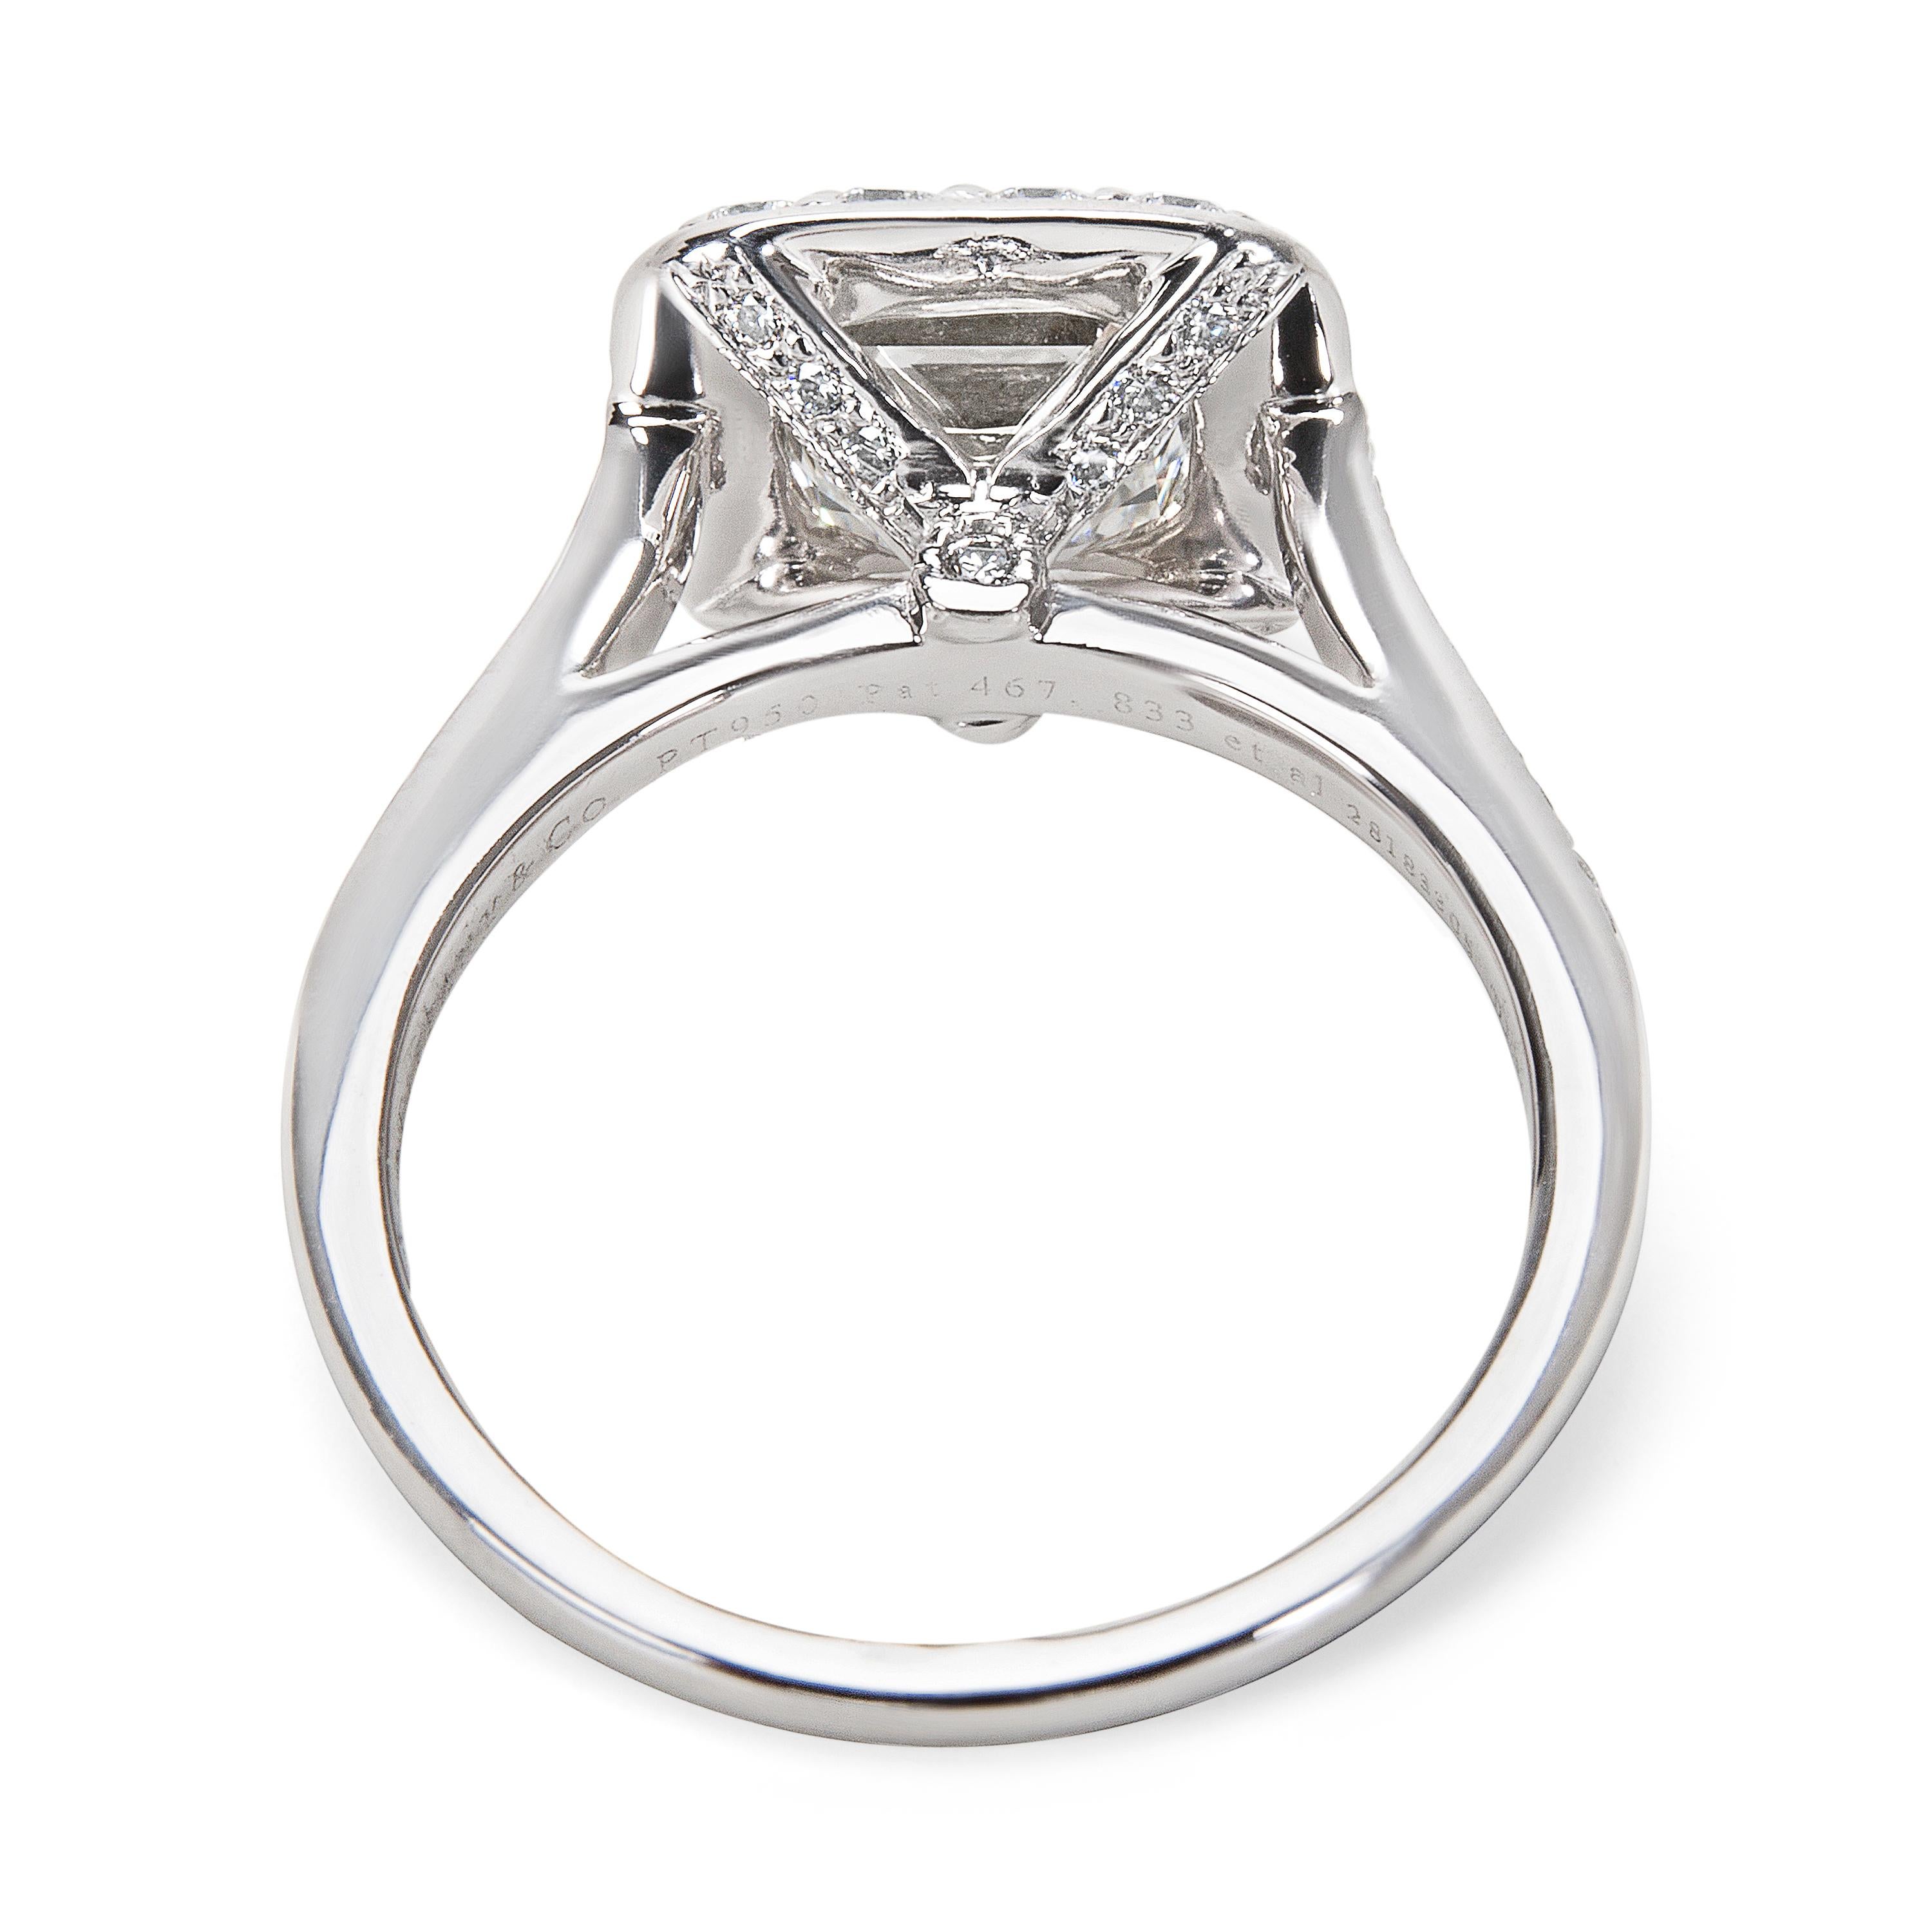 GIA Certified Tiffany & Co. Diamond Solitaire Engagement Ring in Platinum 

Retail price 47,400 USD. In excellent condition and recently polished. Comes with Tiffany & Co. Replacement Valuation verifying color and clarity.

DETAILS
Shape: Round